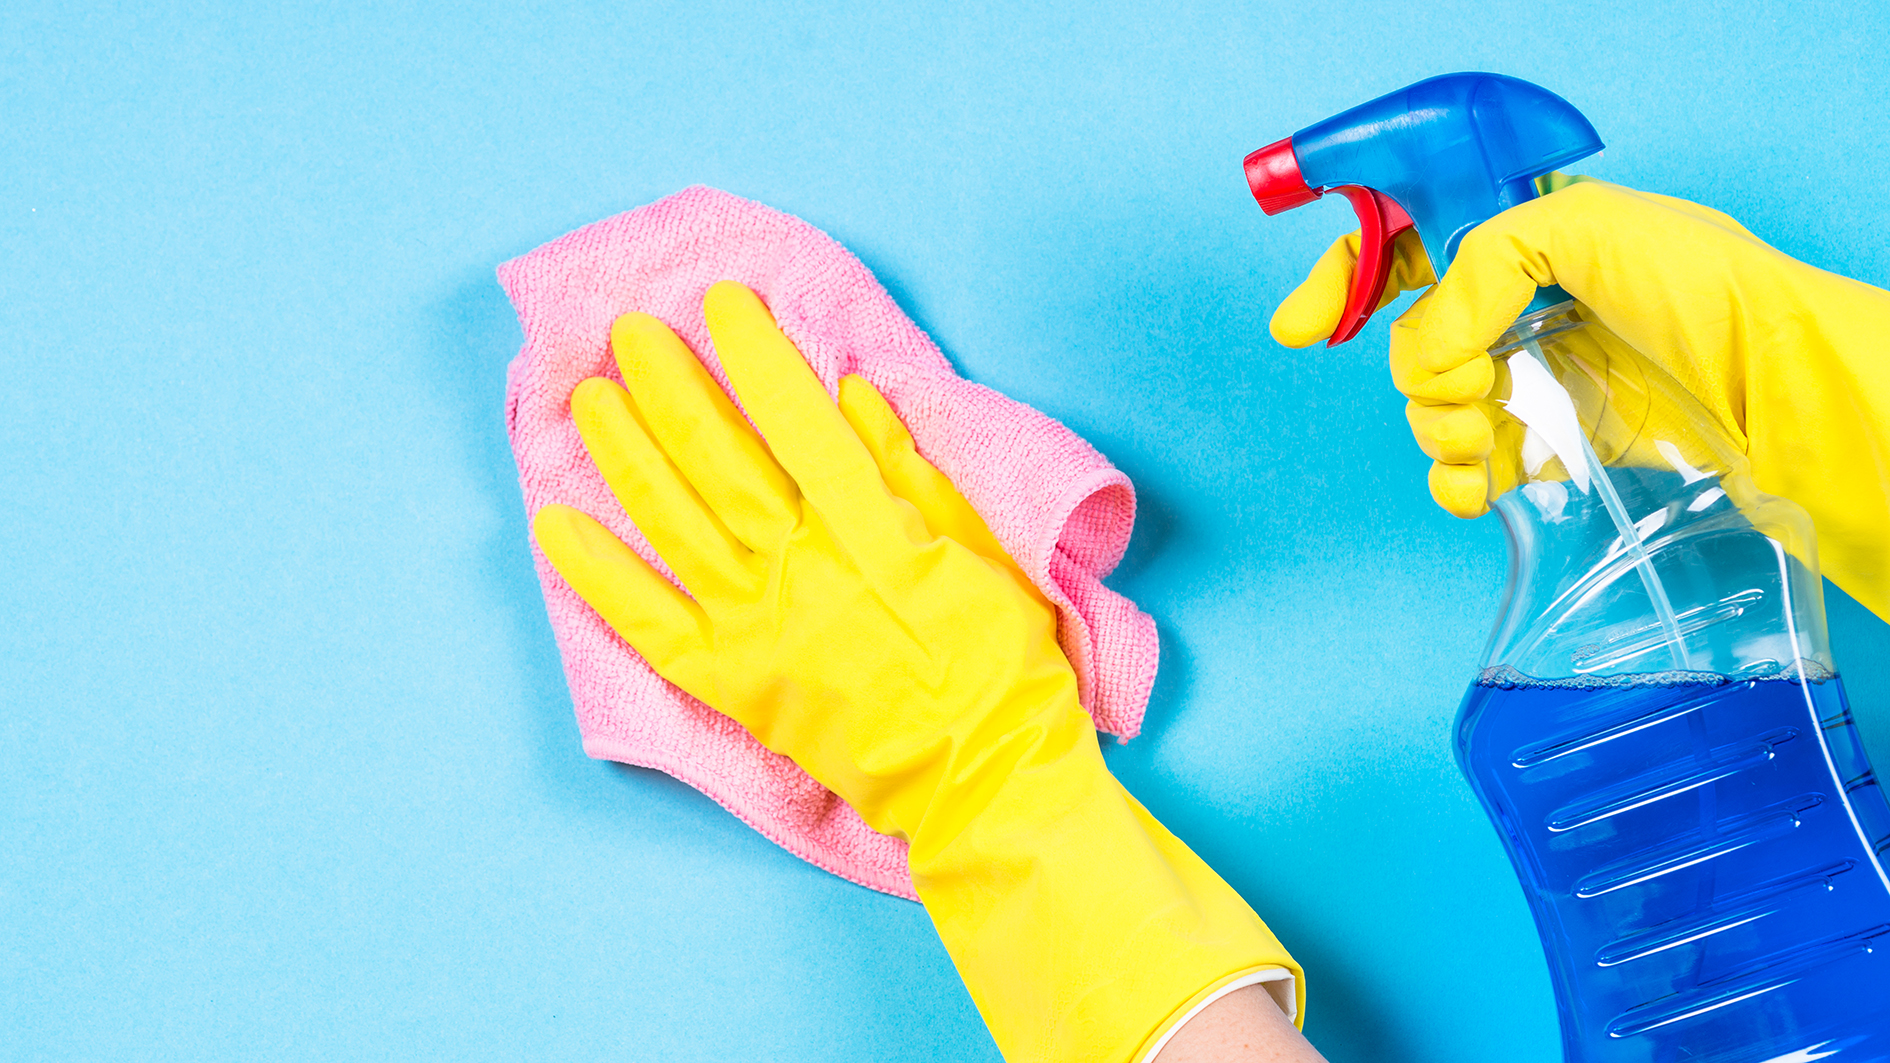 Hands in rubber gloves cleaning